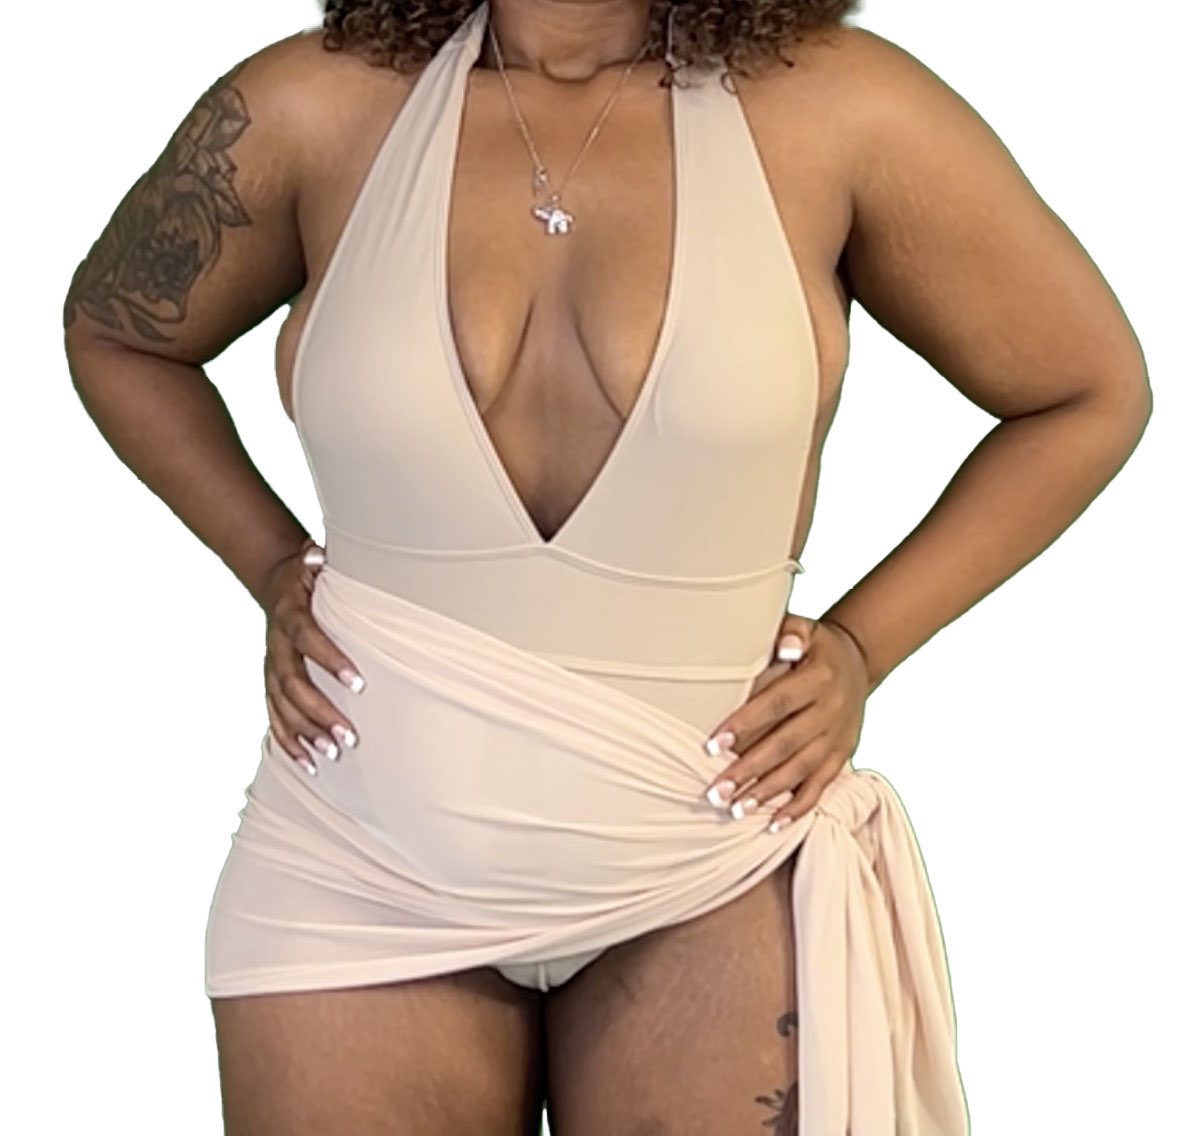 Nude Beach 🏝️ | 10% off every order 🤎
Free 1 Day shipping for orders over $100

LustxLace.com 

#BlackownedSwimwear #BathingSuit #Swimsuit #Plussizeswimwear